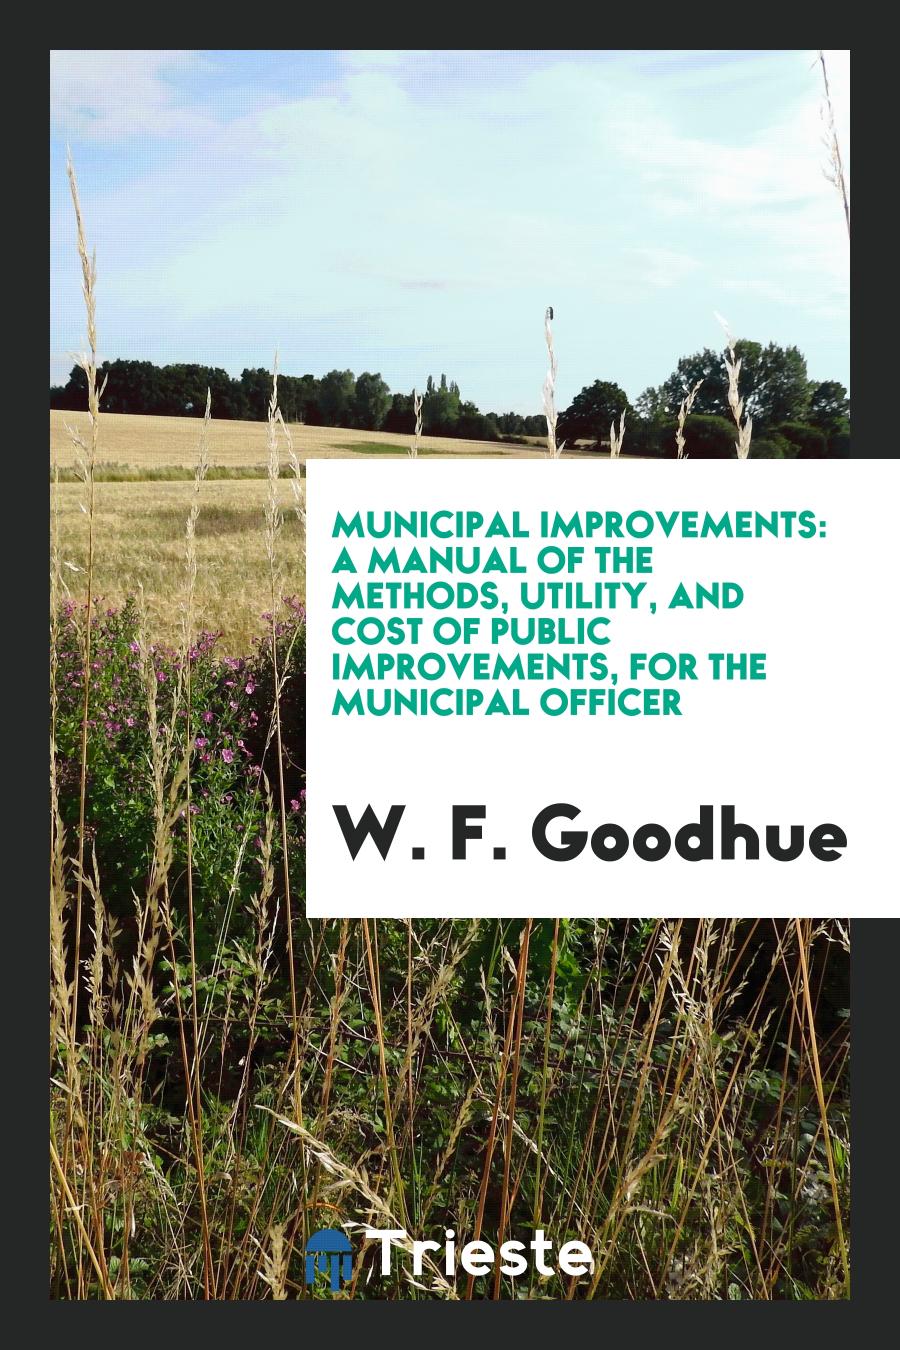 Municipal Improvements: A Manual of the Methods, Utility, and Cost of Public Improvements, for the Municipal Officer